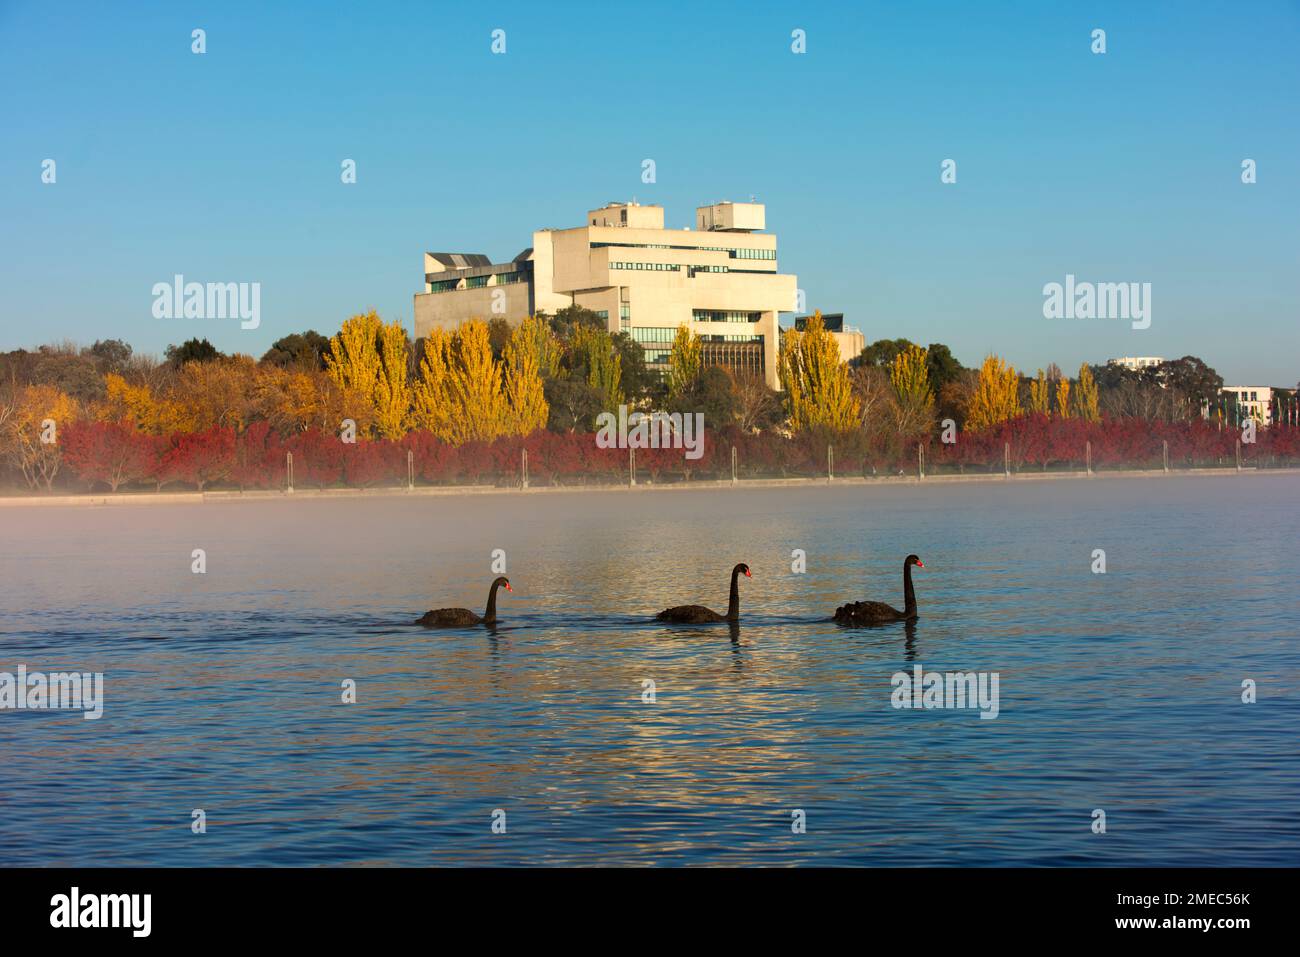 High Court of Australia with Lake Burley Griffin and swans in the foreground. Stock Photo